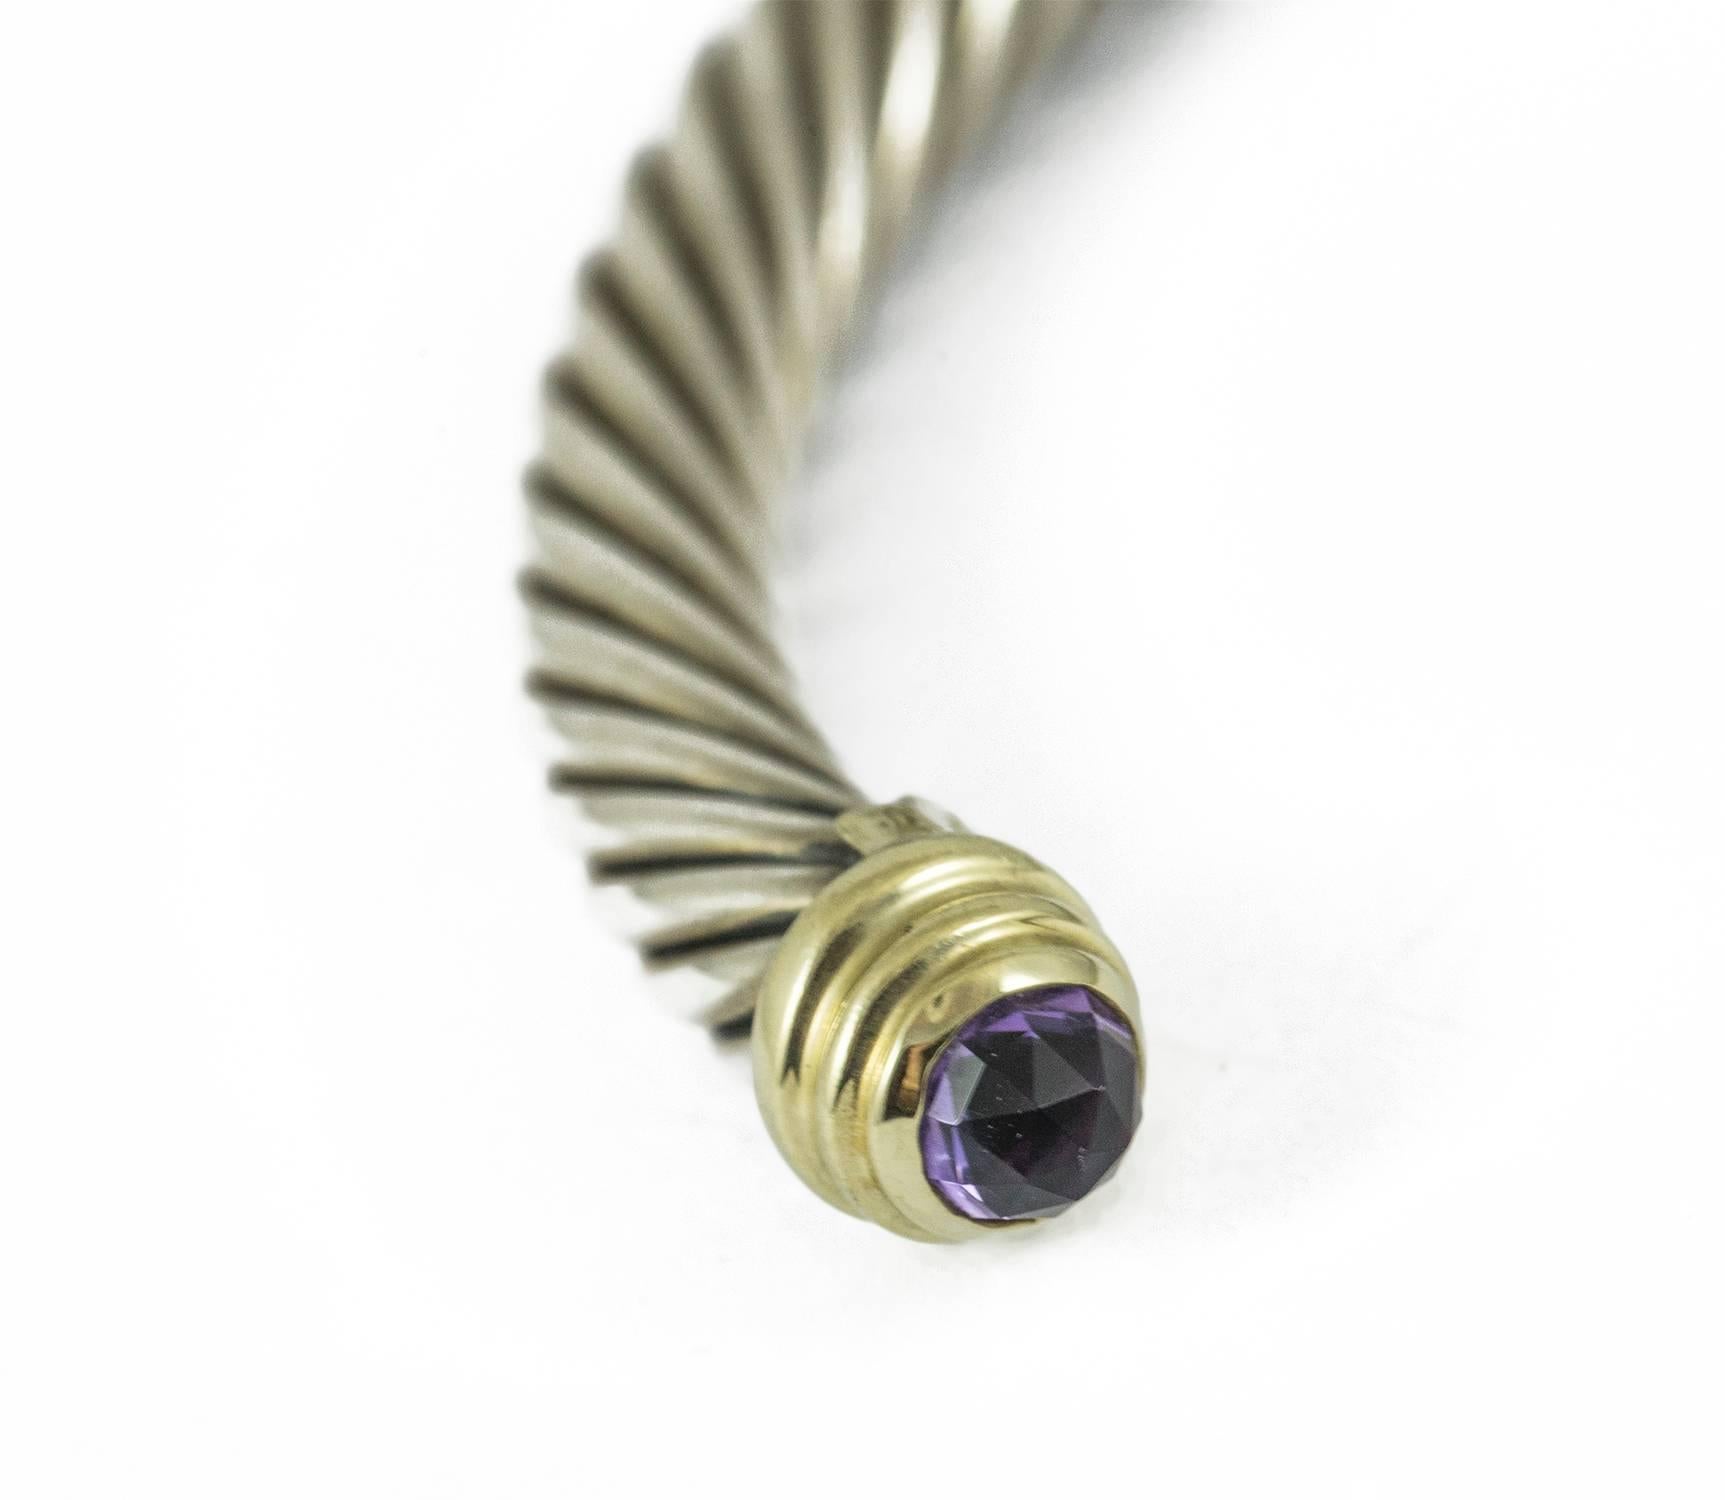 A David Yurman Silver, 14k yellow gold and amethyst bangle. The gemstones are set in yellow gold which tips the bangle opening. This bracelet is in excellent condition and is medium in size.